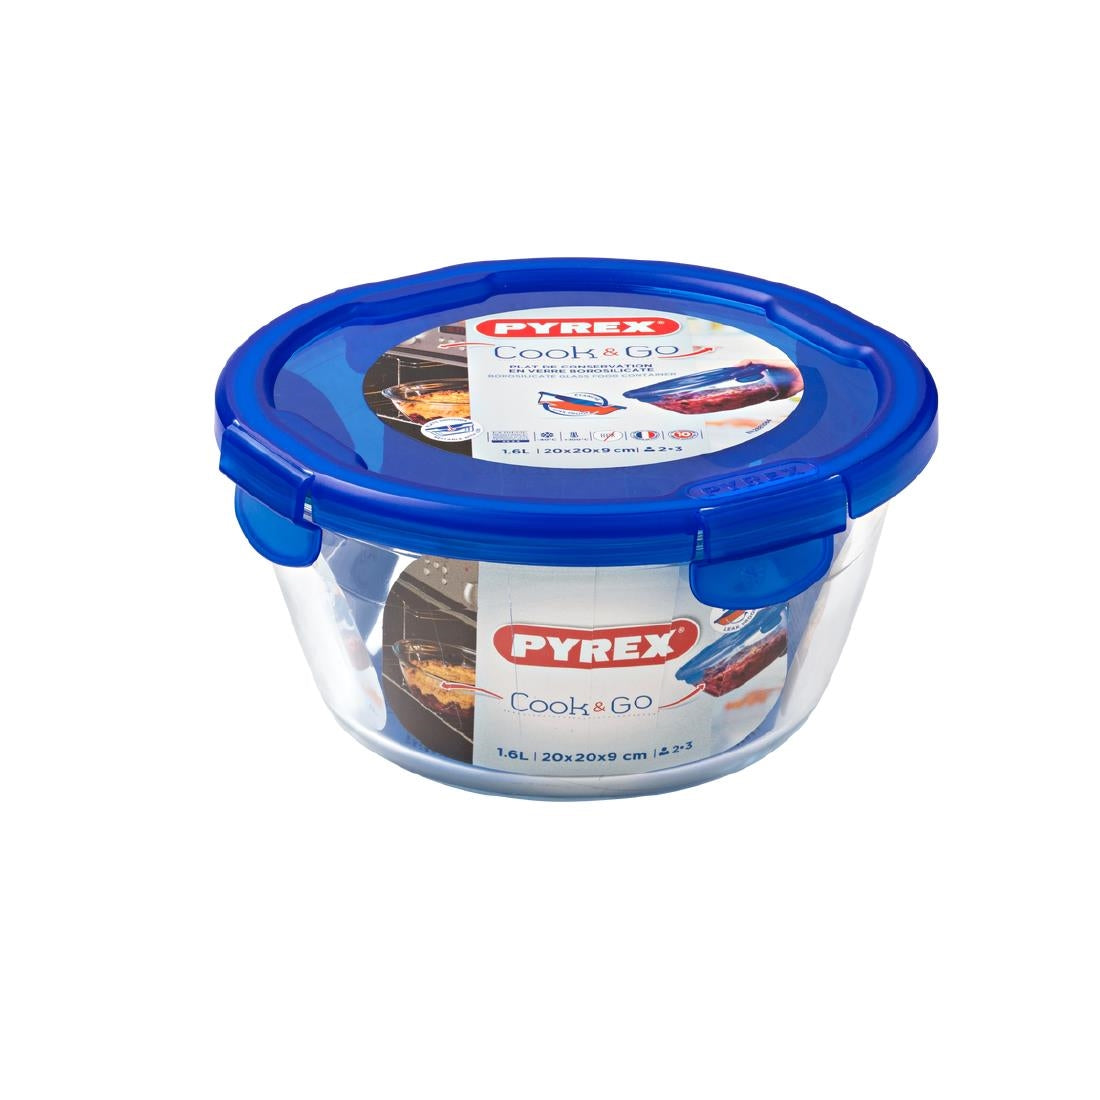 FU134 Pyrex Cook & Go Medium Round Dish With Lid 1.6Ltr